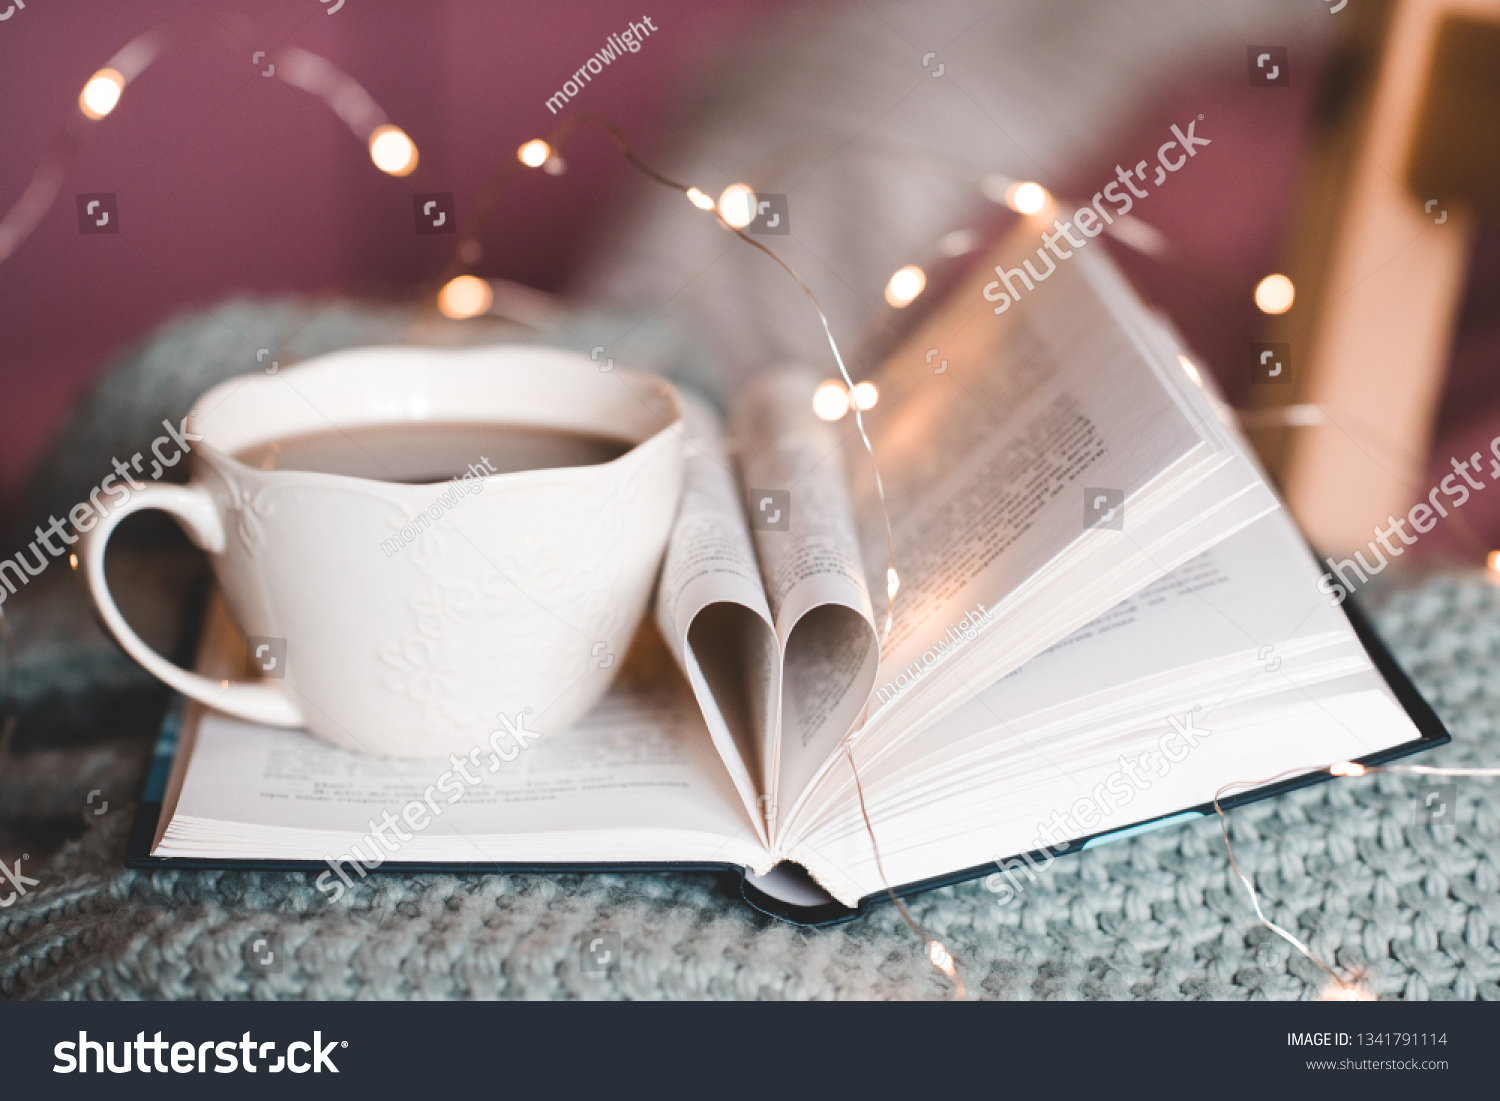 Cup Tea On Open Book Heart Stock Image Download Now